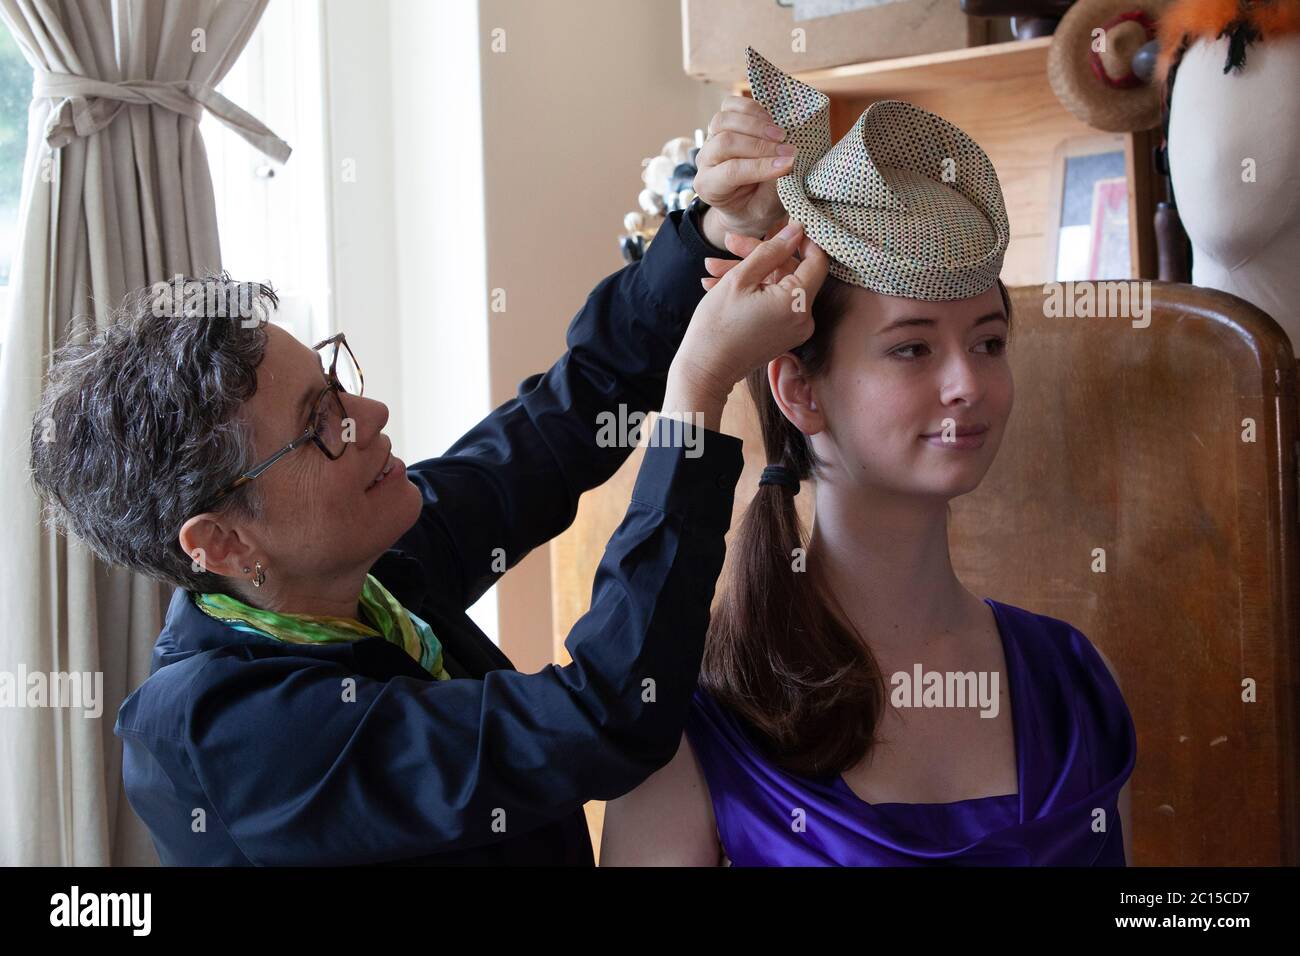 London, UK, 14 June 2020: Milliner Leanne Fredrick prepares one of her hats, modelled by her daughter Emeline, for the social media fundraiser 'Royal Ascot at Home' which will run from 16th to 20th June. As the horse-racing and social event has been cancelled due to coronavirus social distancing safety measures, people are encouraged to post photos of their hats and outfits with the hastag #StyledWithThanks and make a donation to Ascot's chosen Covid-19 charities. Anna Watson/Alamy Live News. Stock Photo